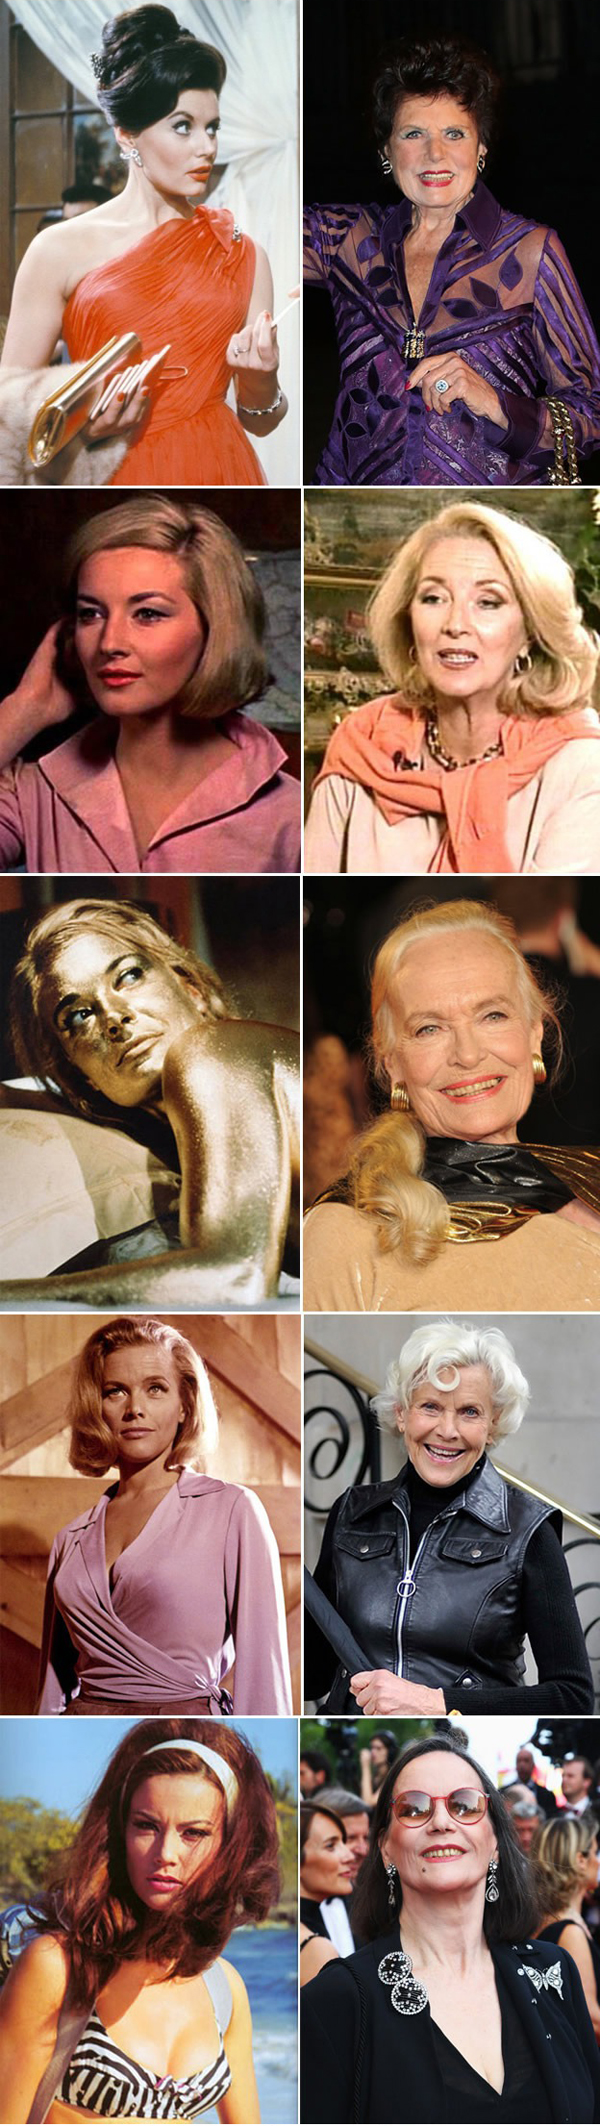 bond girls then and now